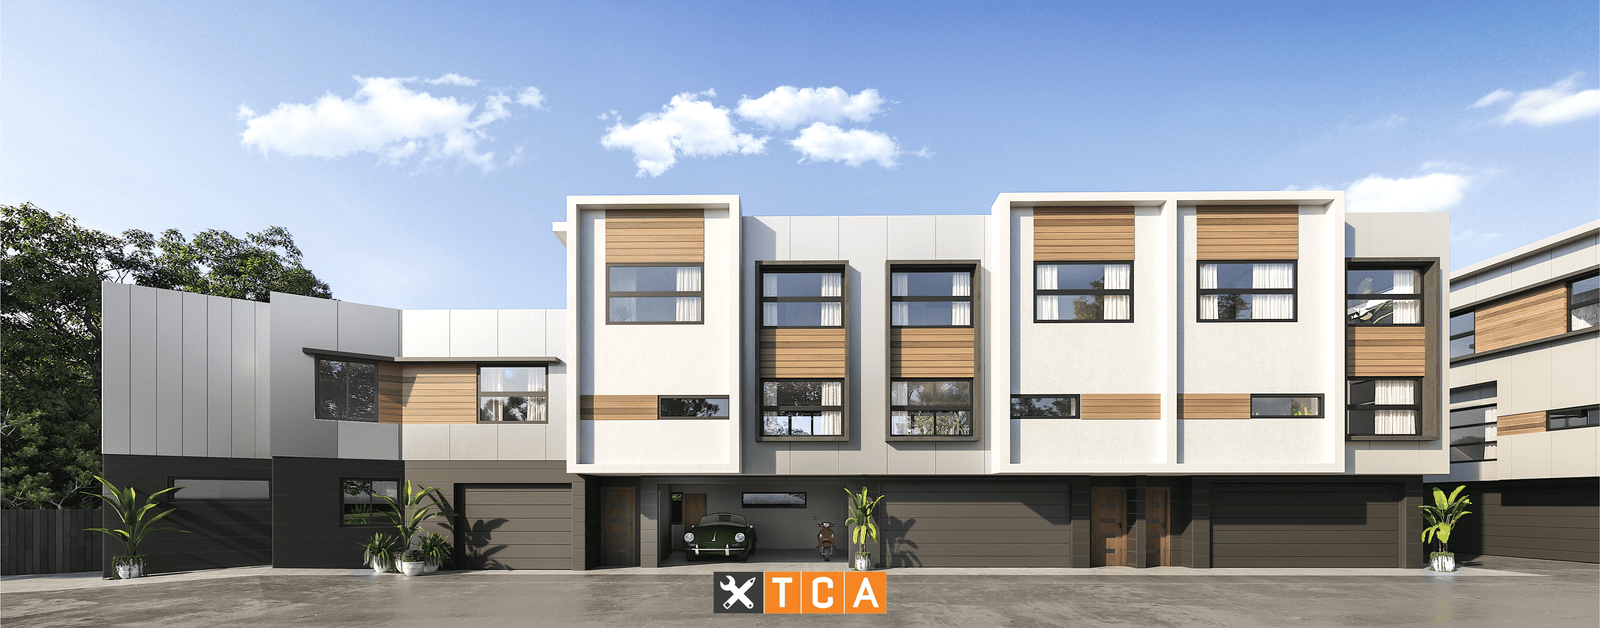 Carina Townhouses completed project